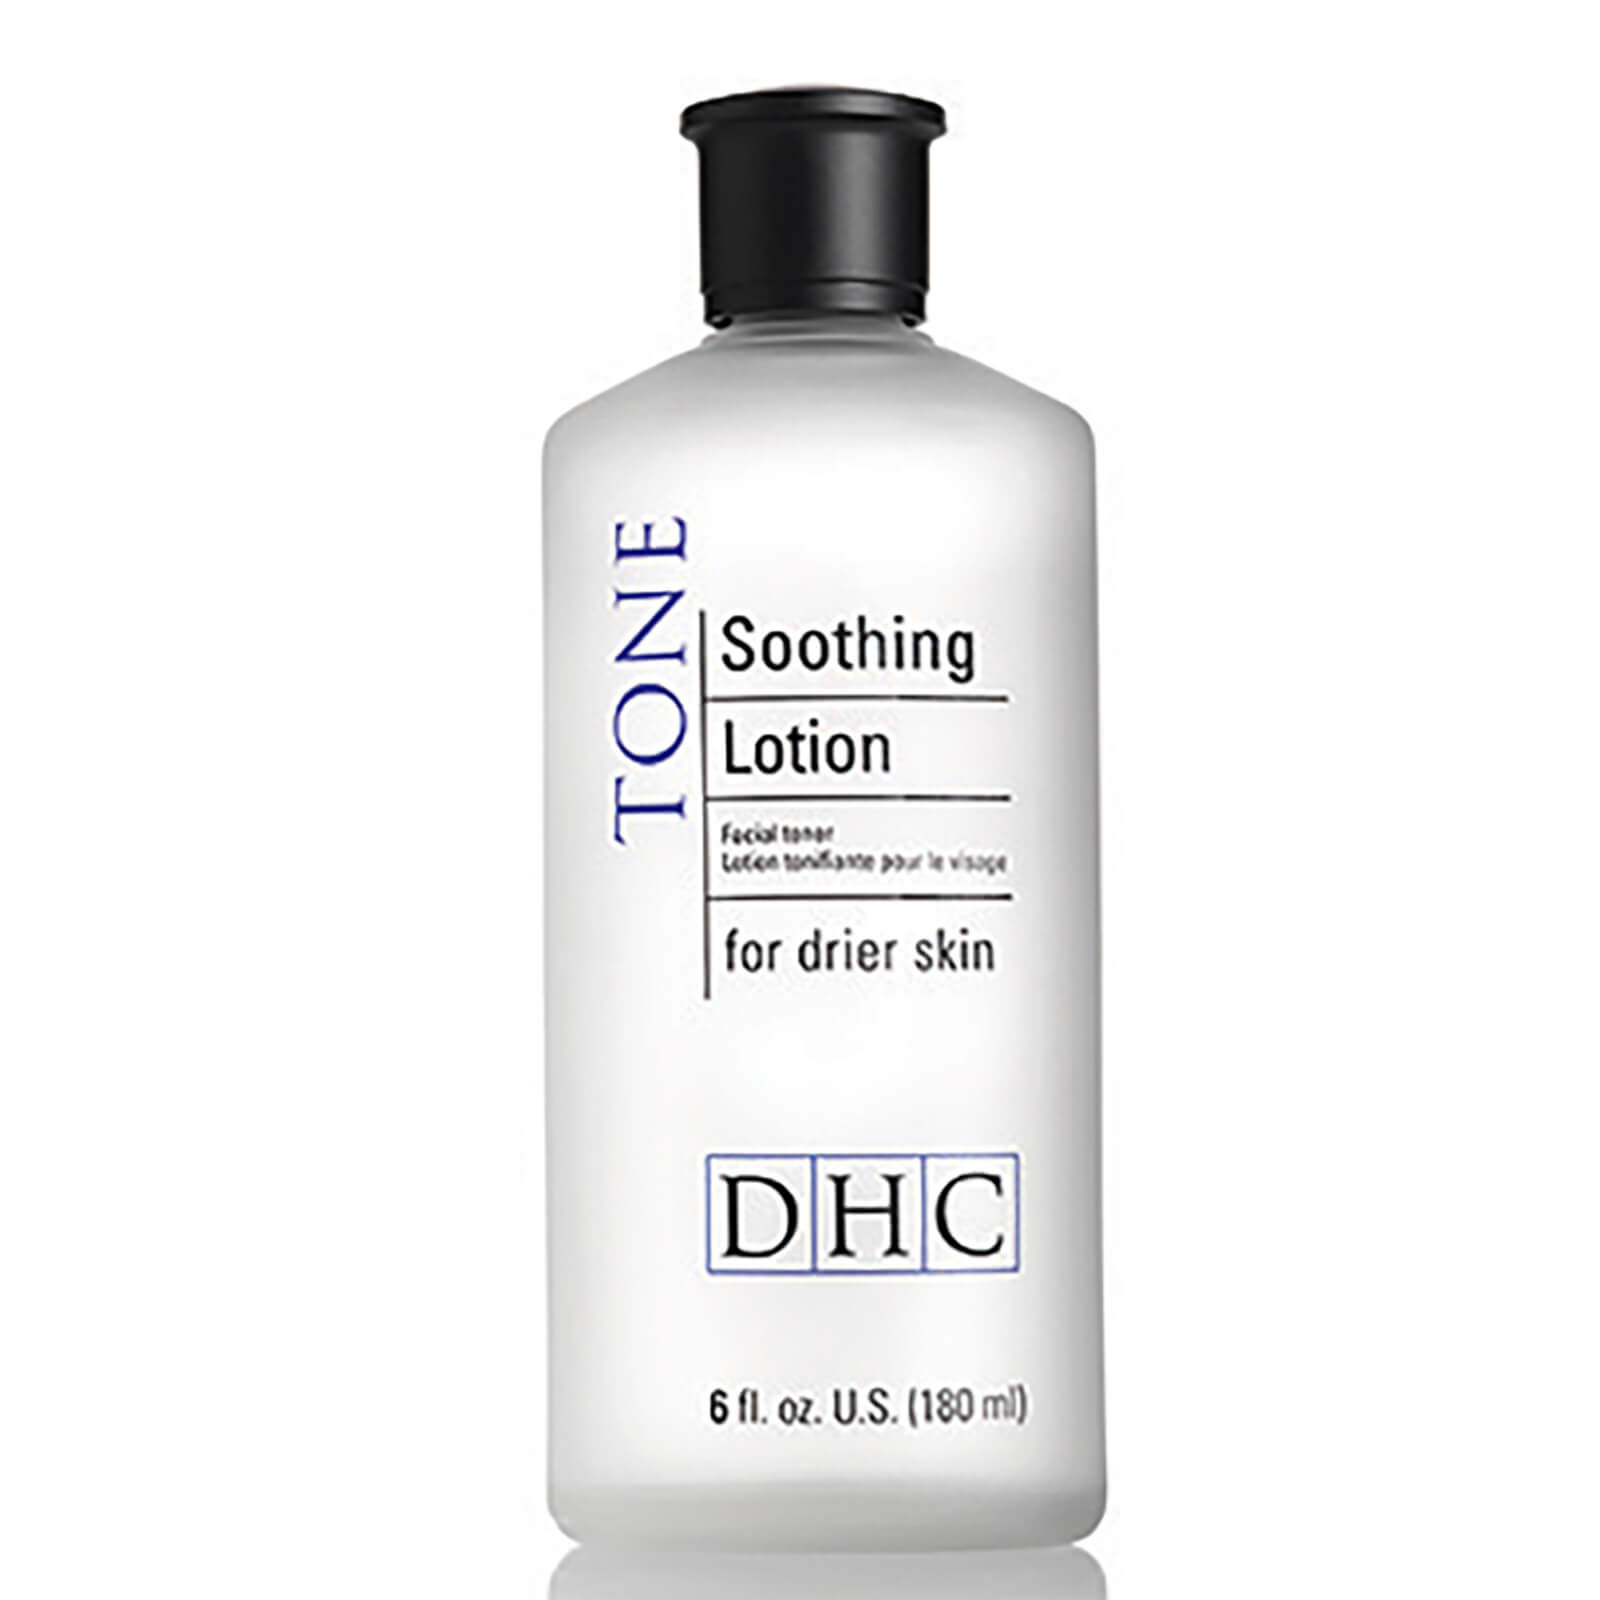 DHC Soothing Lotion